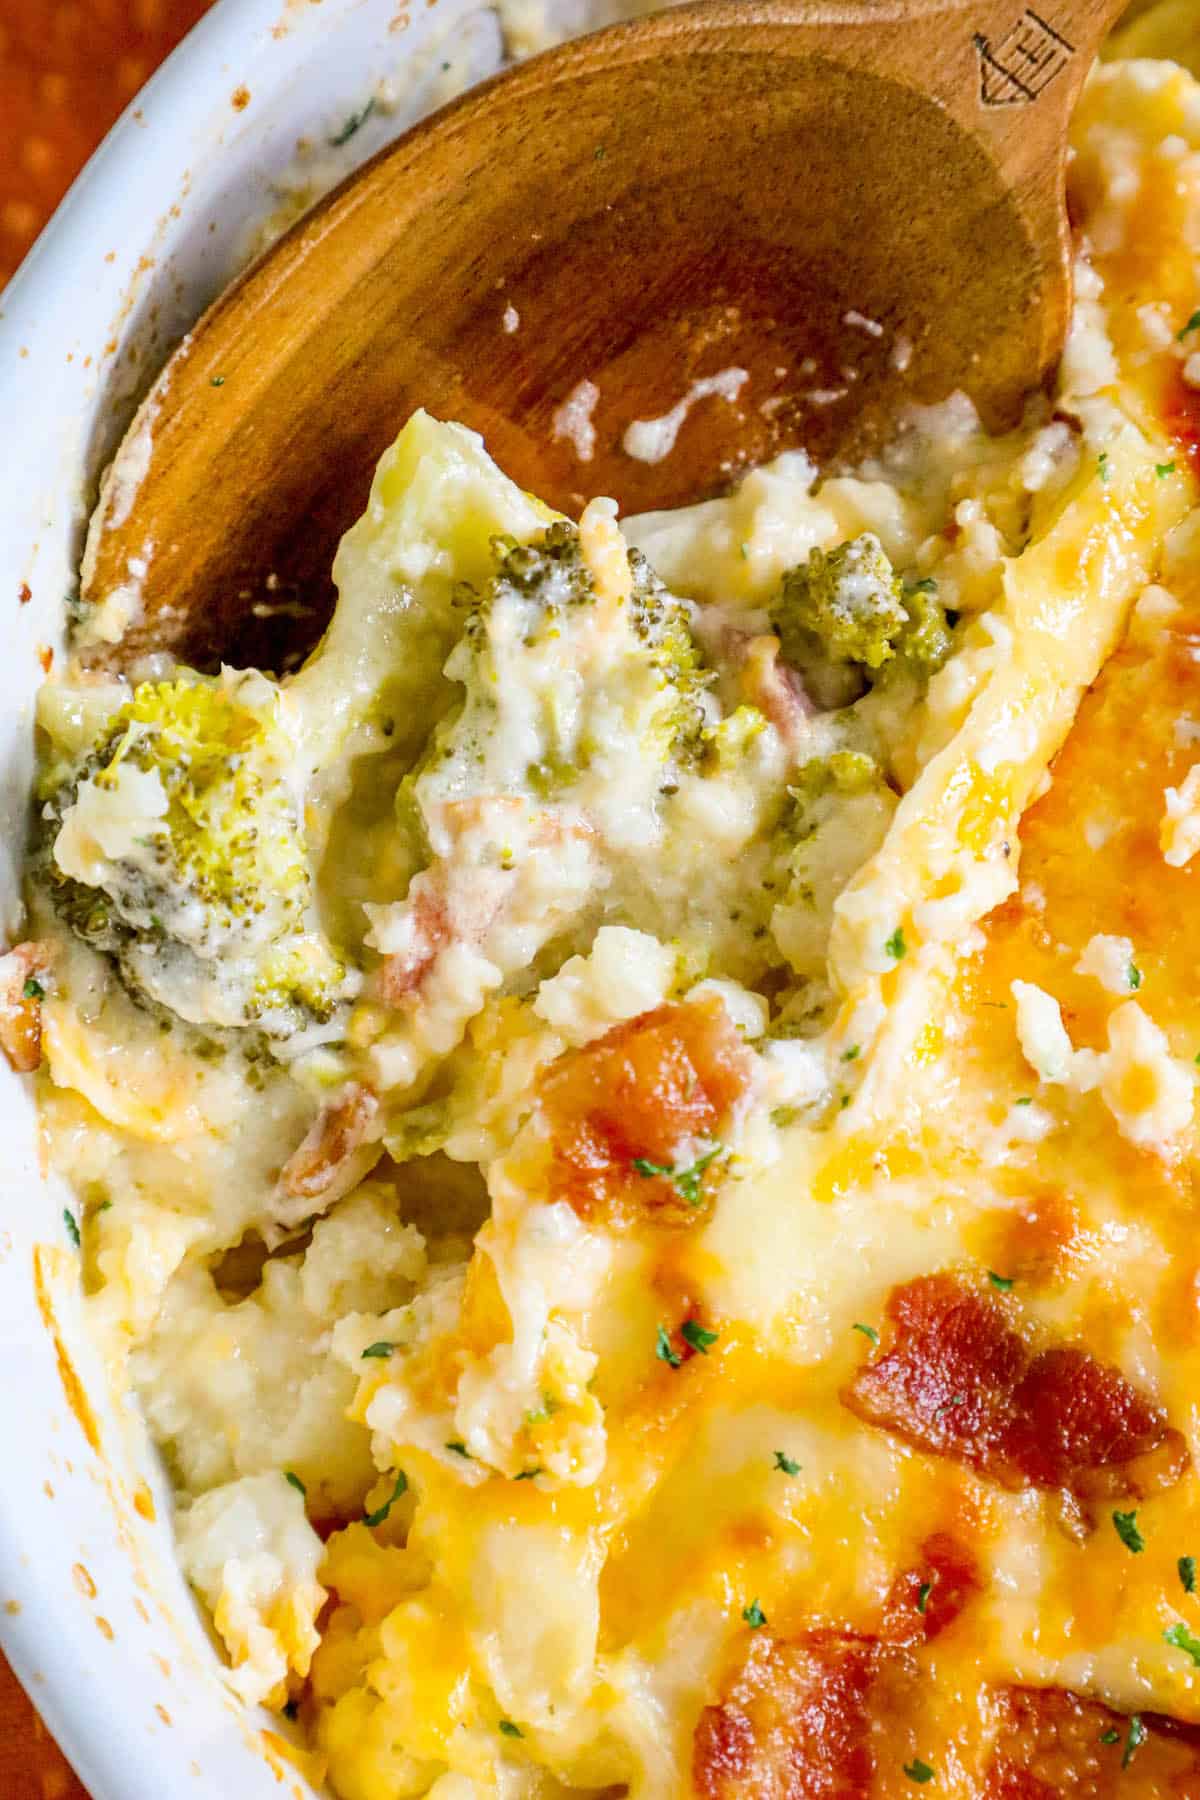 A broccoli and bacon casserole dish with cheese.